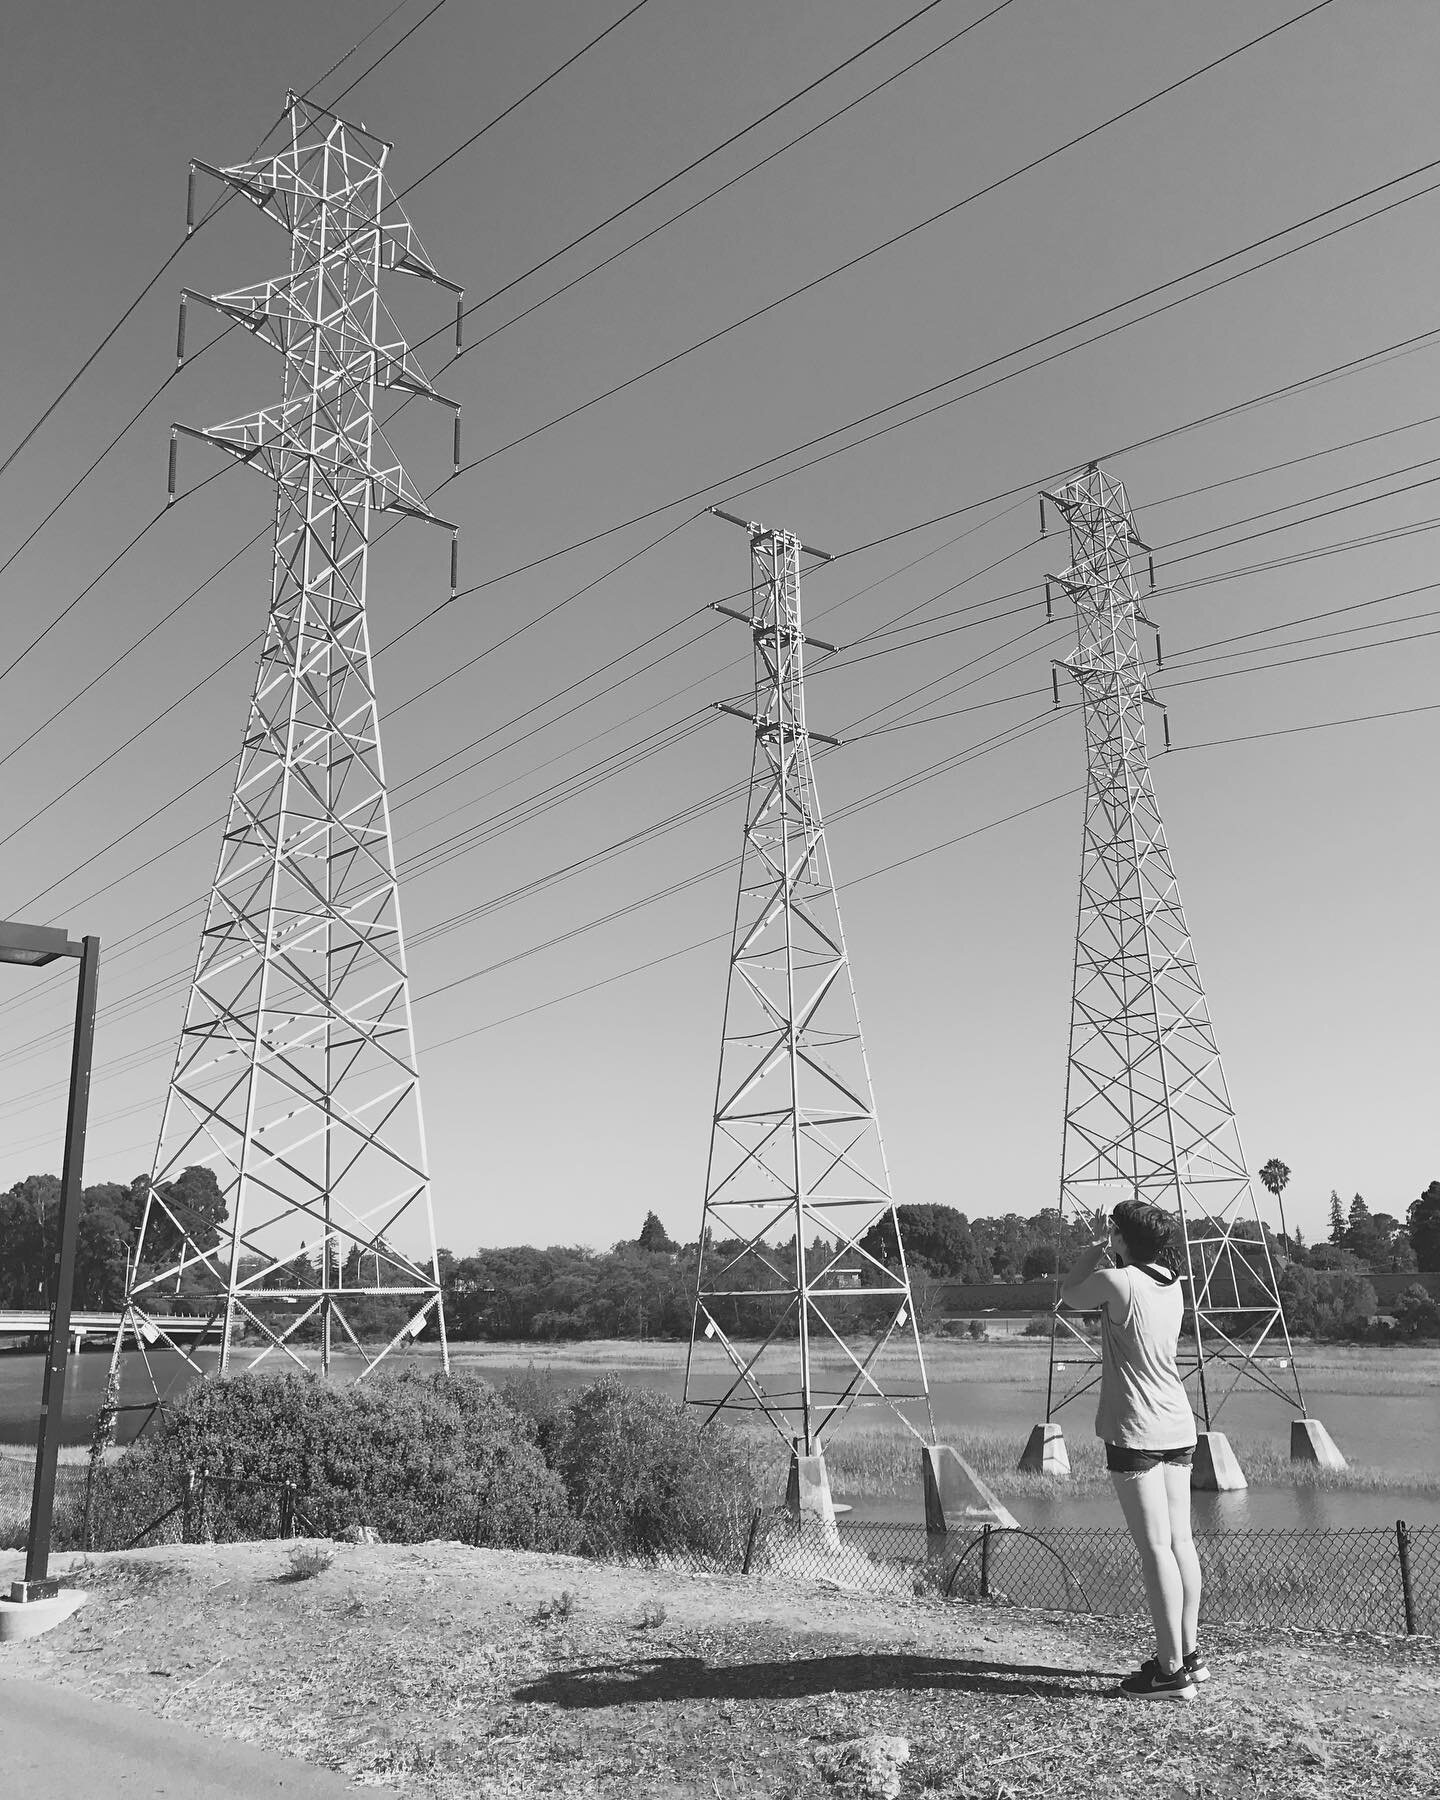 I&rsquo;ve been obsessed for a long time. Doing research on transmission towers circa 2017 
📸 @chillasaur